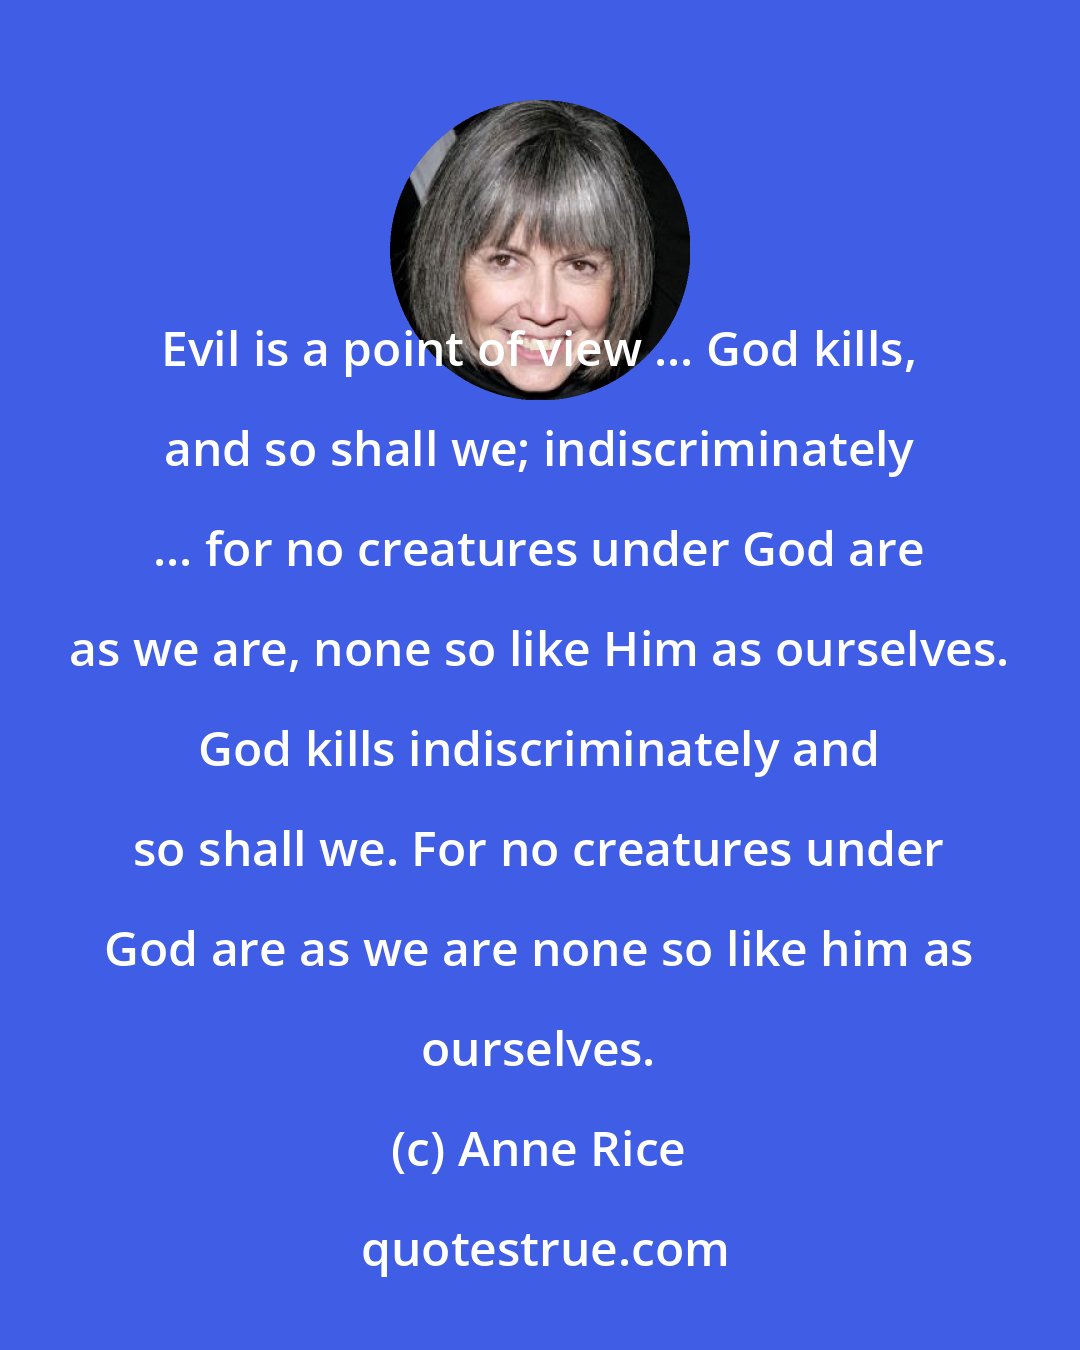 Anne Rice: Evil is a point of view ... God kills, and so shall we; indiscriminately ... for no creatures under God are as we are, none so like Him as ourselves. God kills indiscriminately and so shall we. For no creatures under God are as we are none so like him as ourselves.